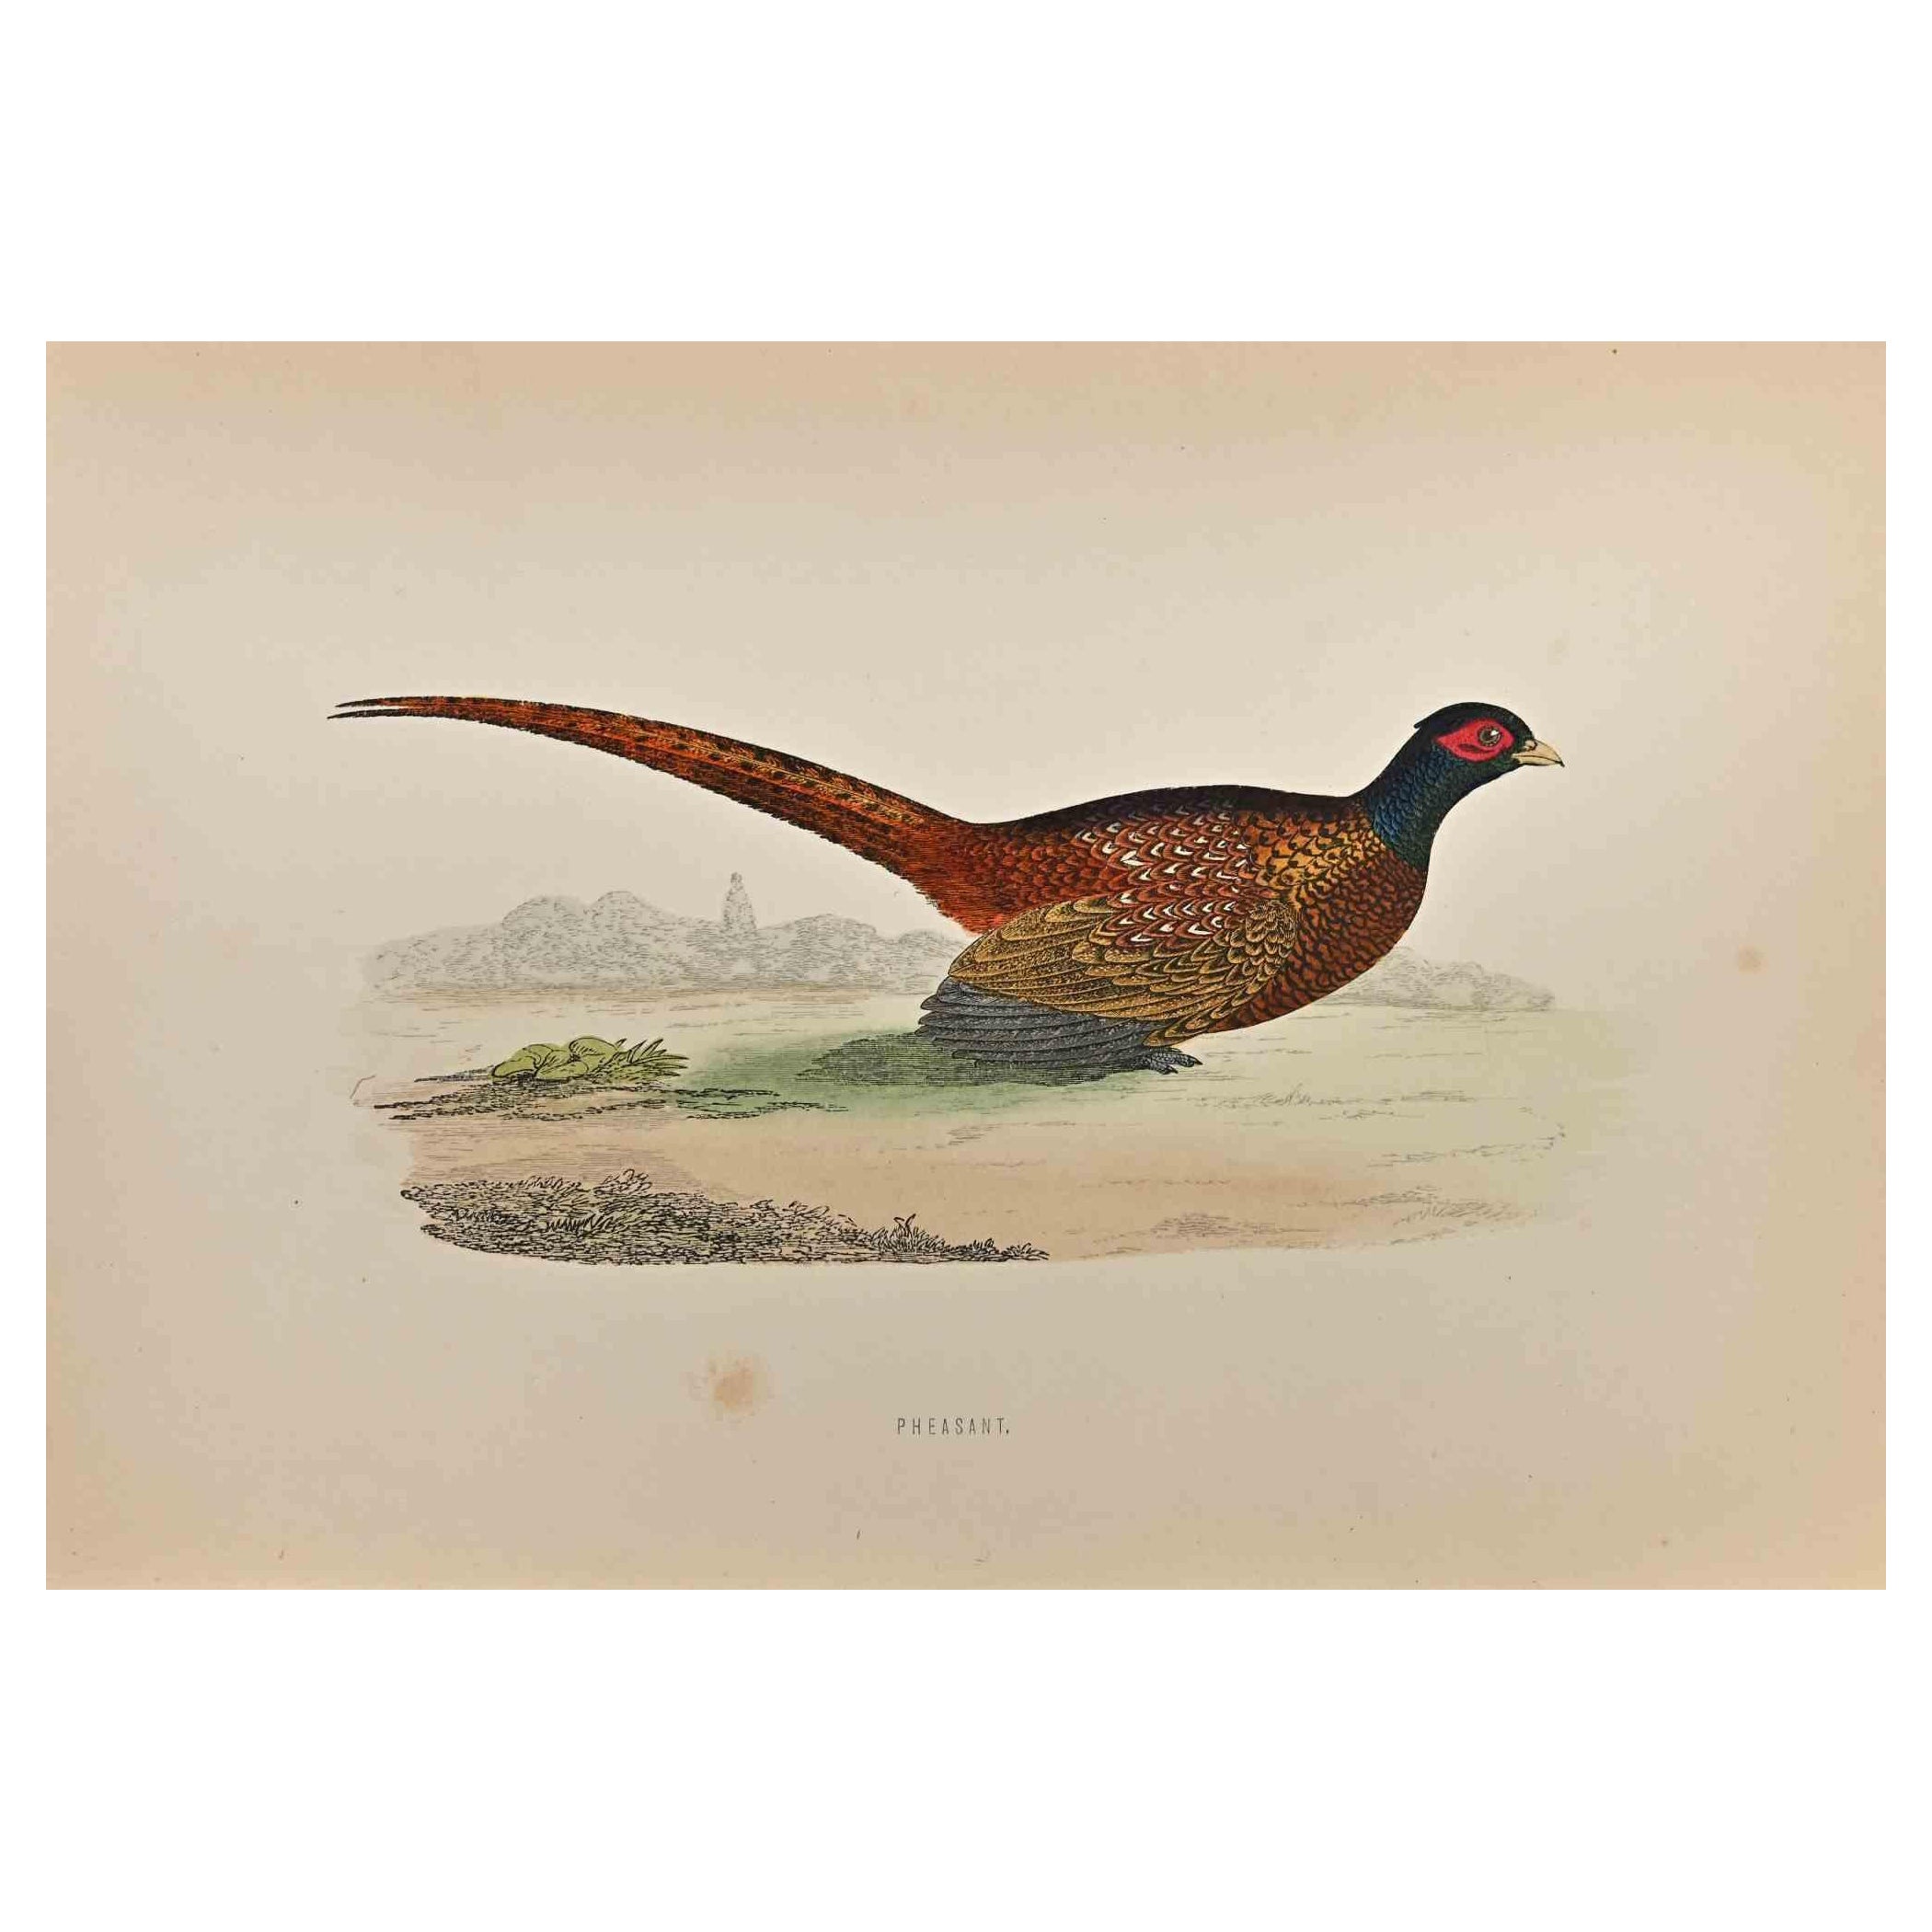 Pheasant is a modern artwork realized in 1870 by the British artist Alexander Francis Lydon (1836-1917) . 

Woodcut print, hand colored, published by London, Bell & Sons, 1870.  Name of the bird printed in plate. This work is part of a print suite